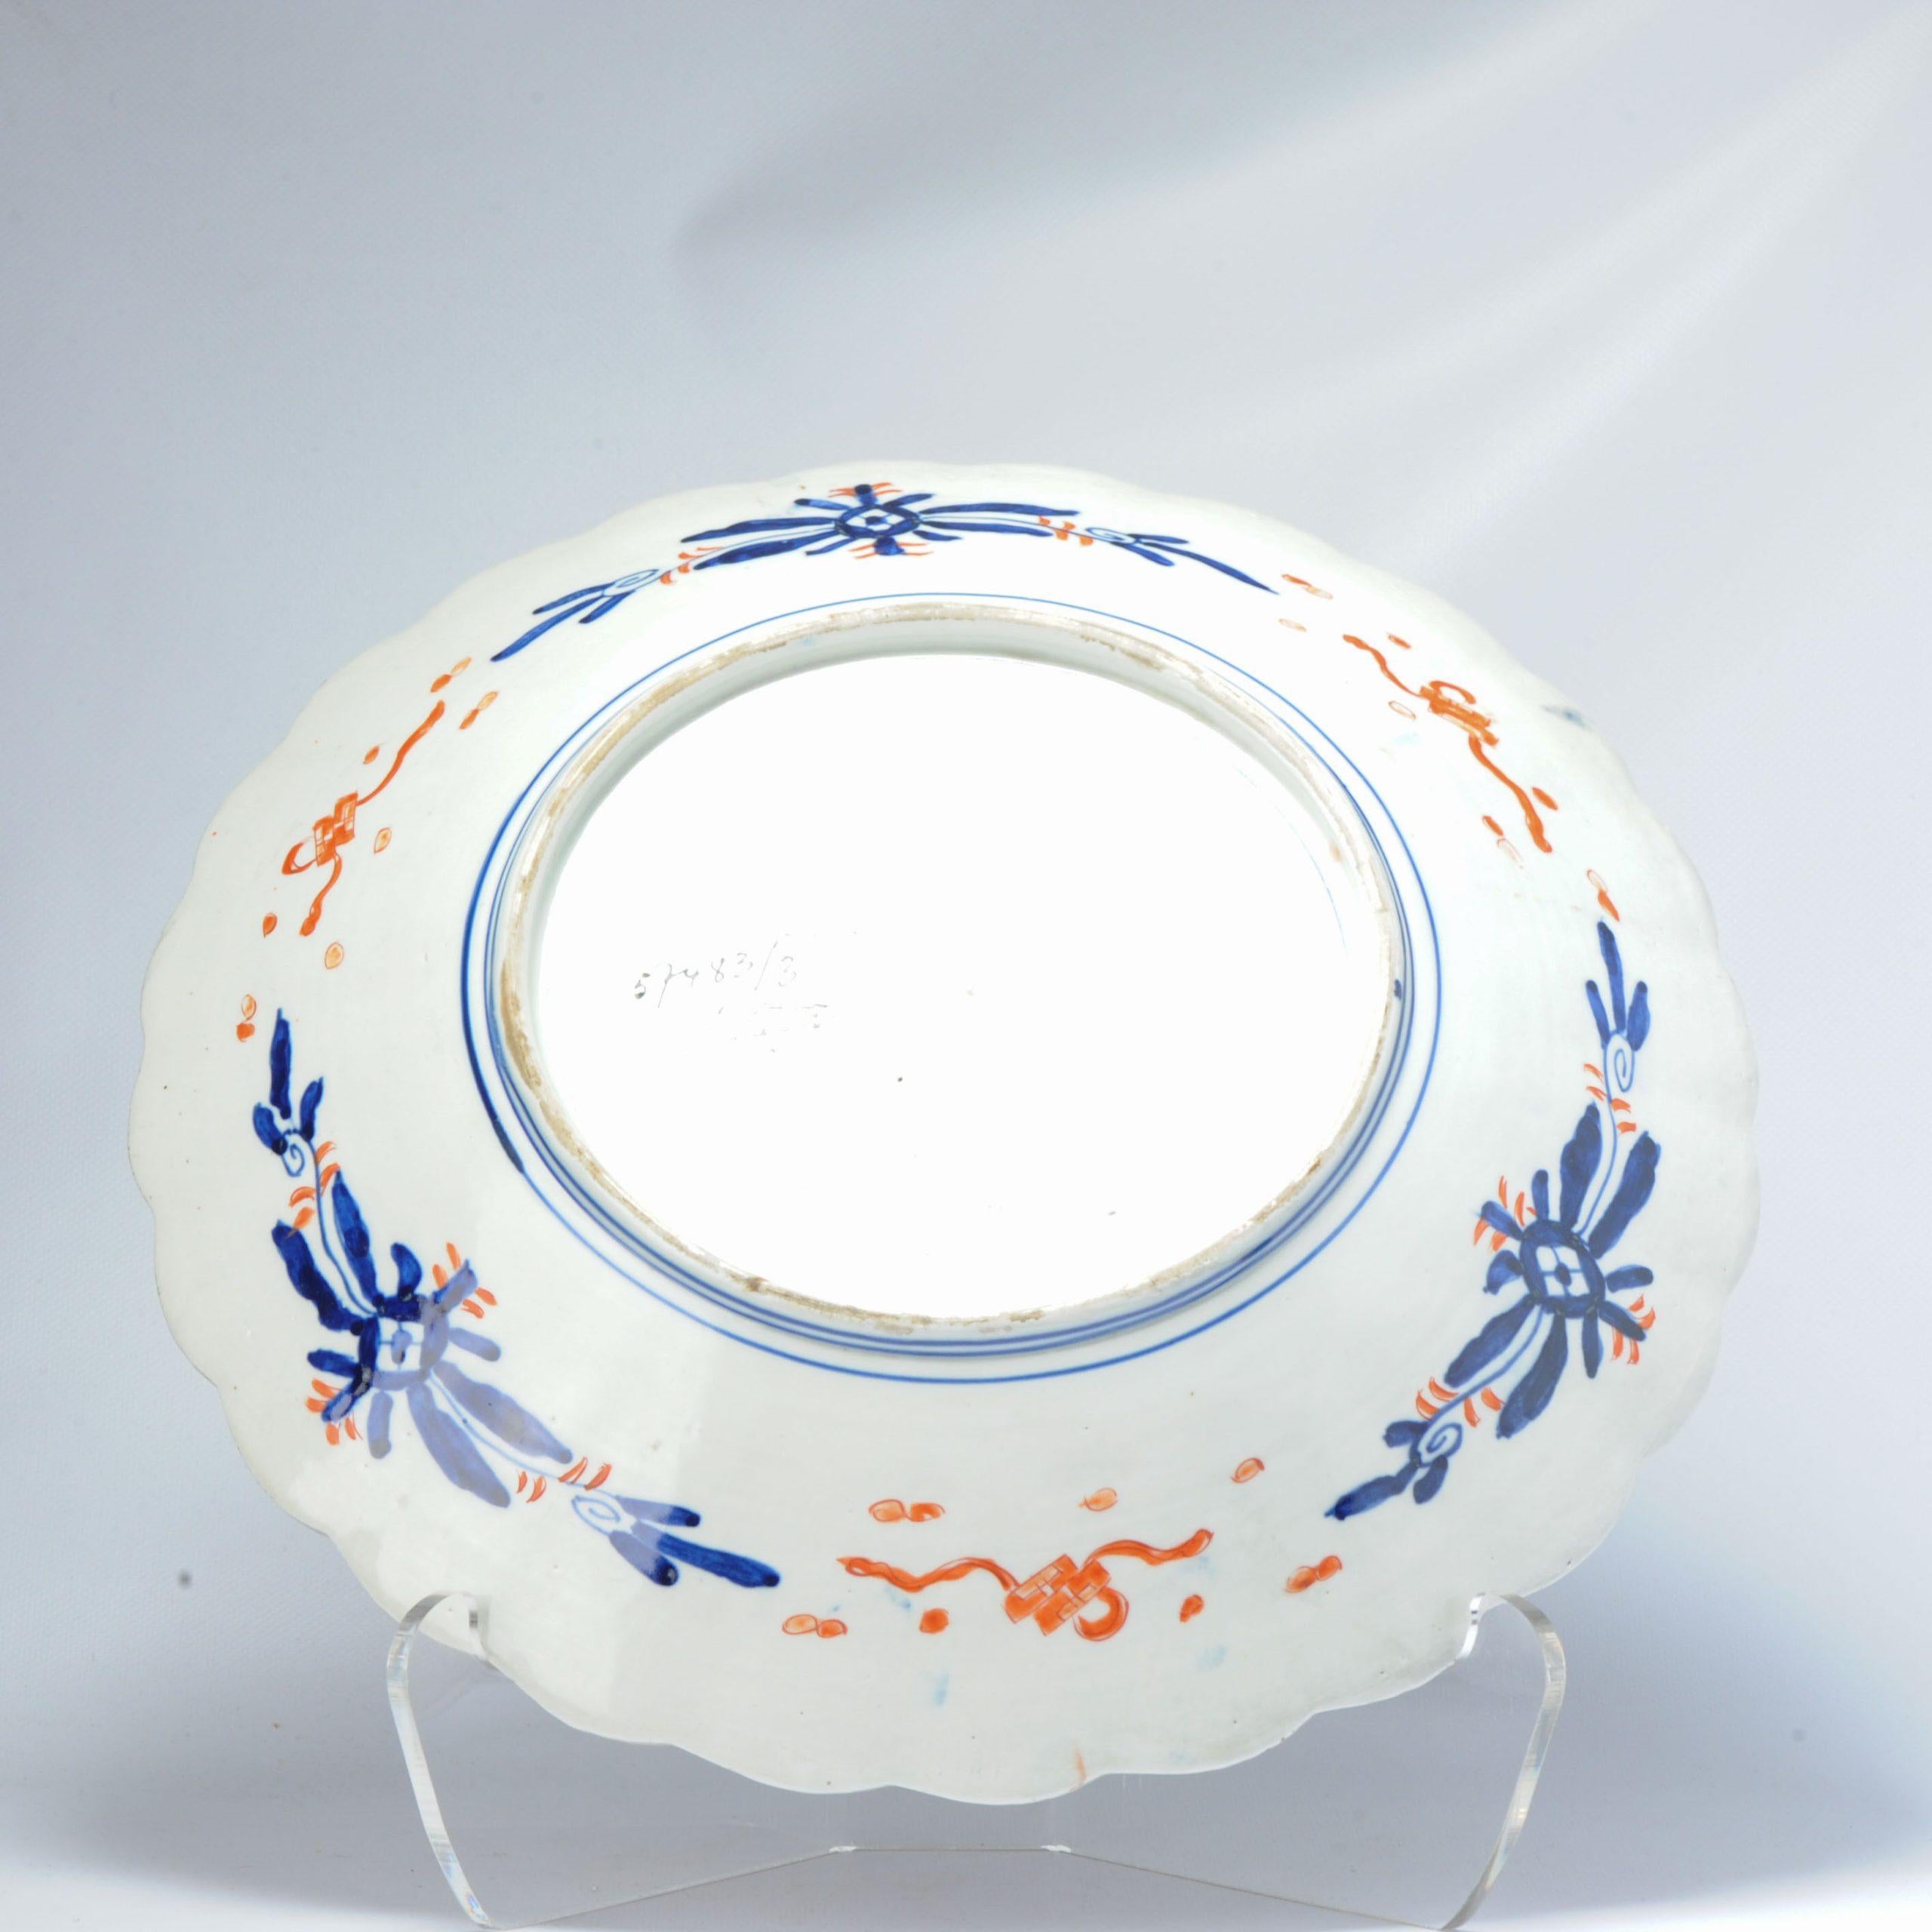 Very lovely piece with a nicely painted scene of different kind of flowers.

Additional information:
Material: Porcelain & Pottery
Region of Origin: Japan
Period: 19th century Meiji Periode (1867-1912)
Age: ca 1900
Original/Reproduction: